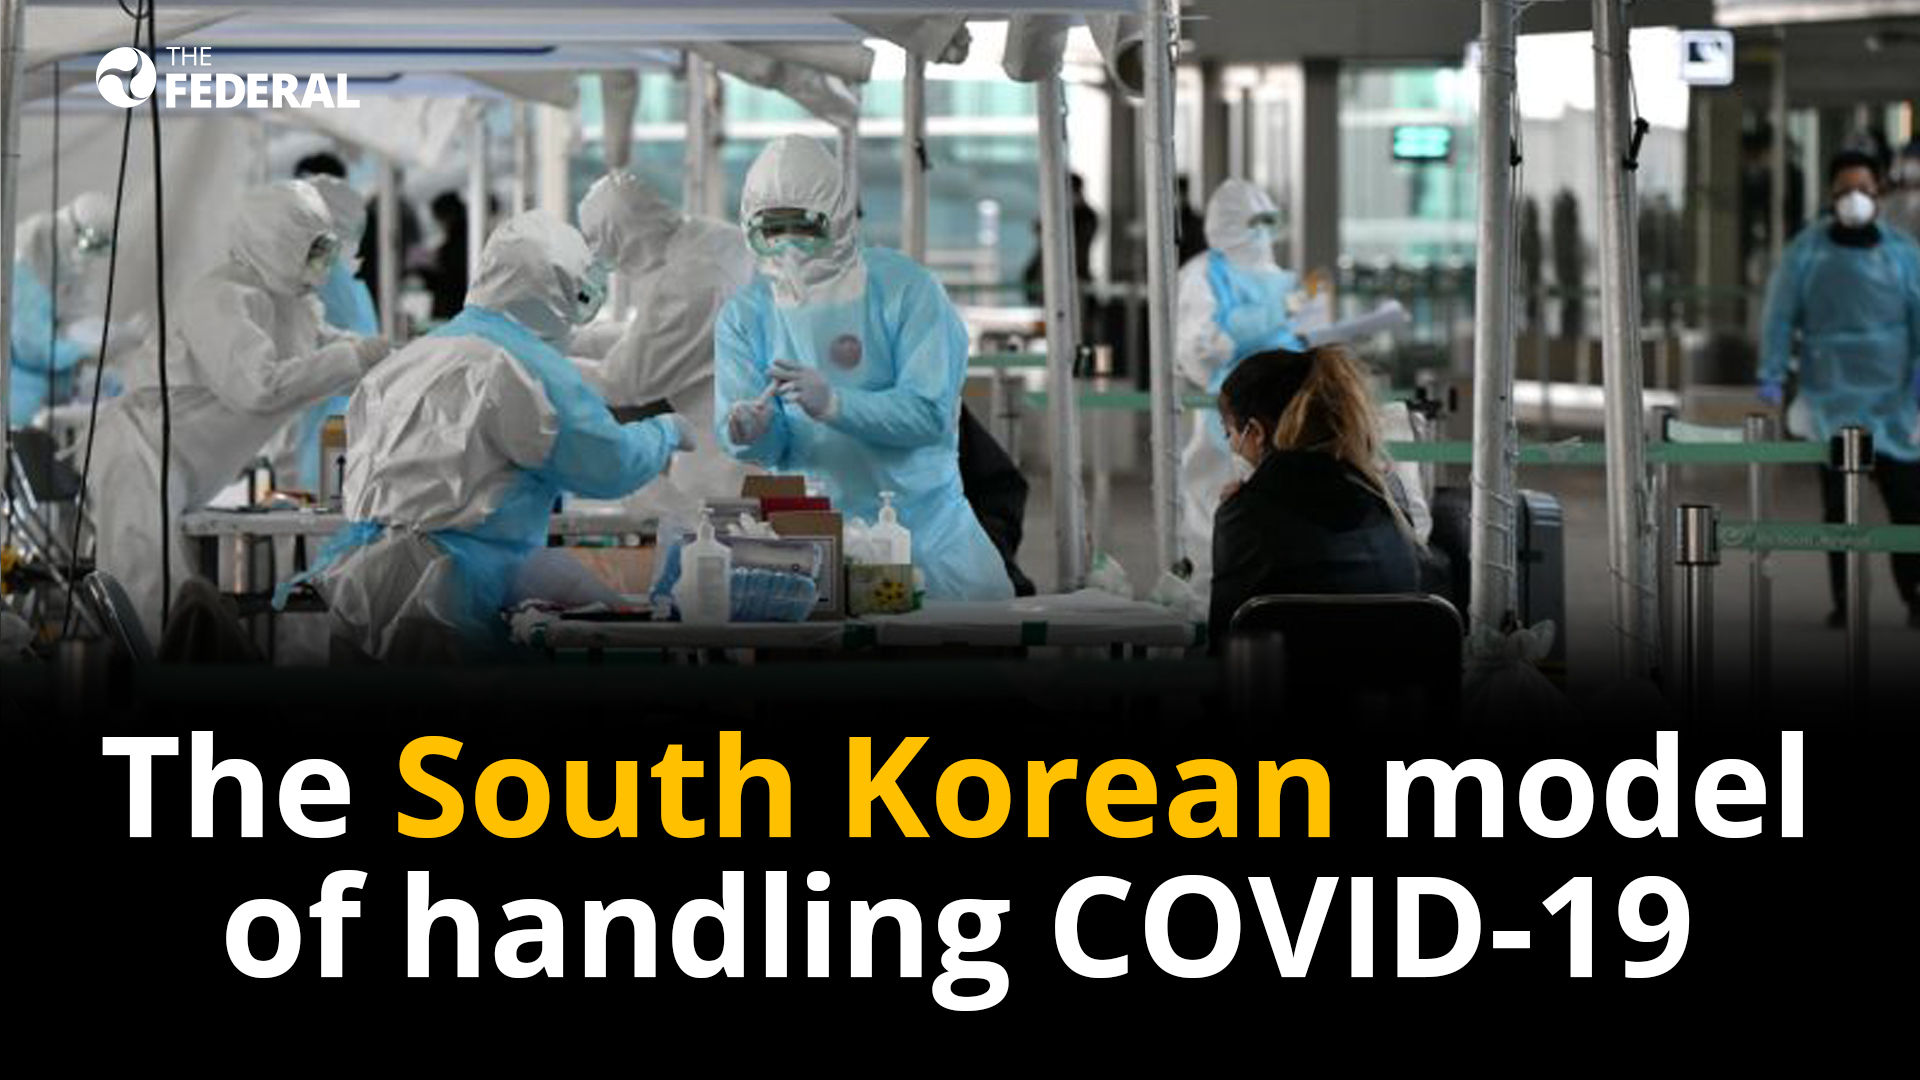 Can other countries take a cue from South Korea on tackling COVID